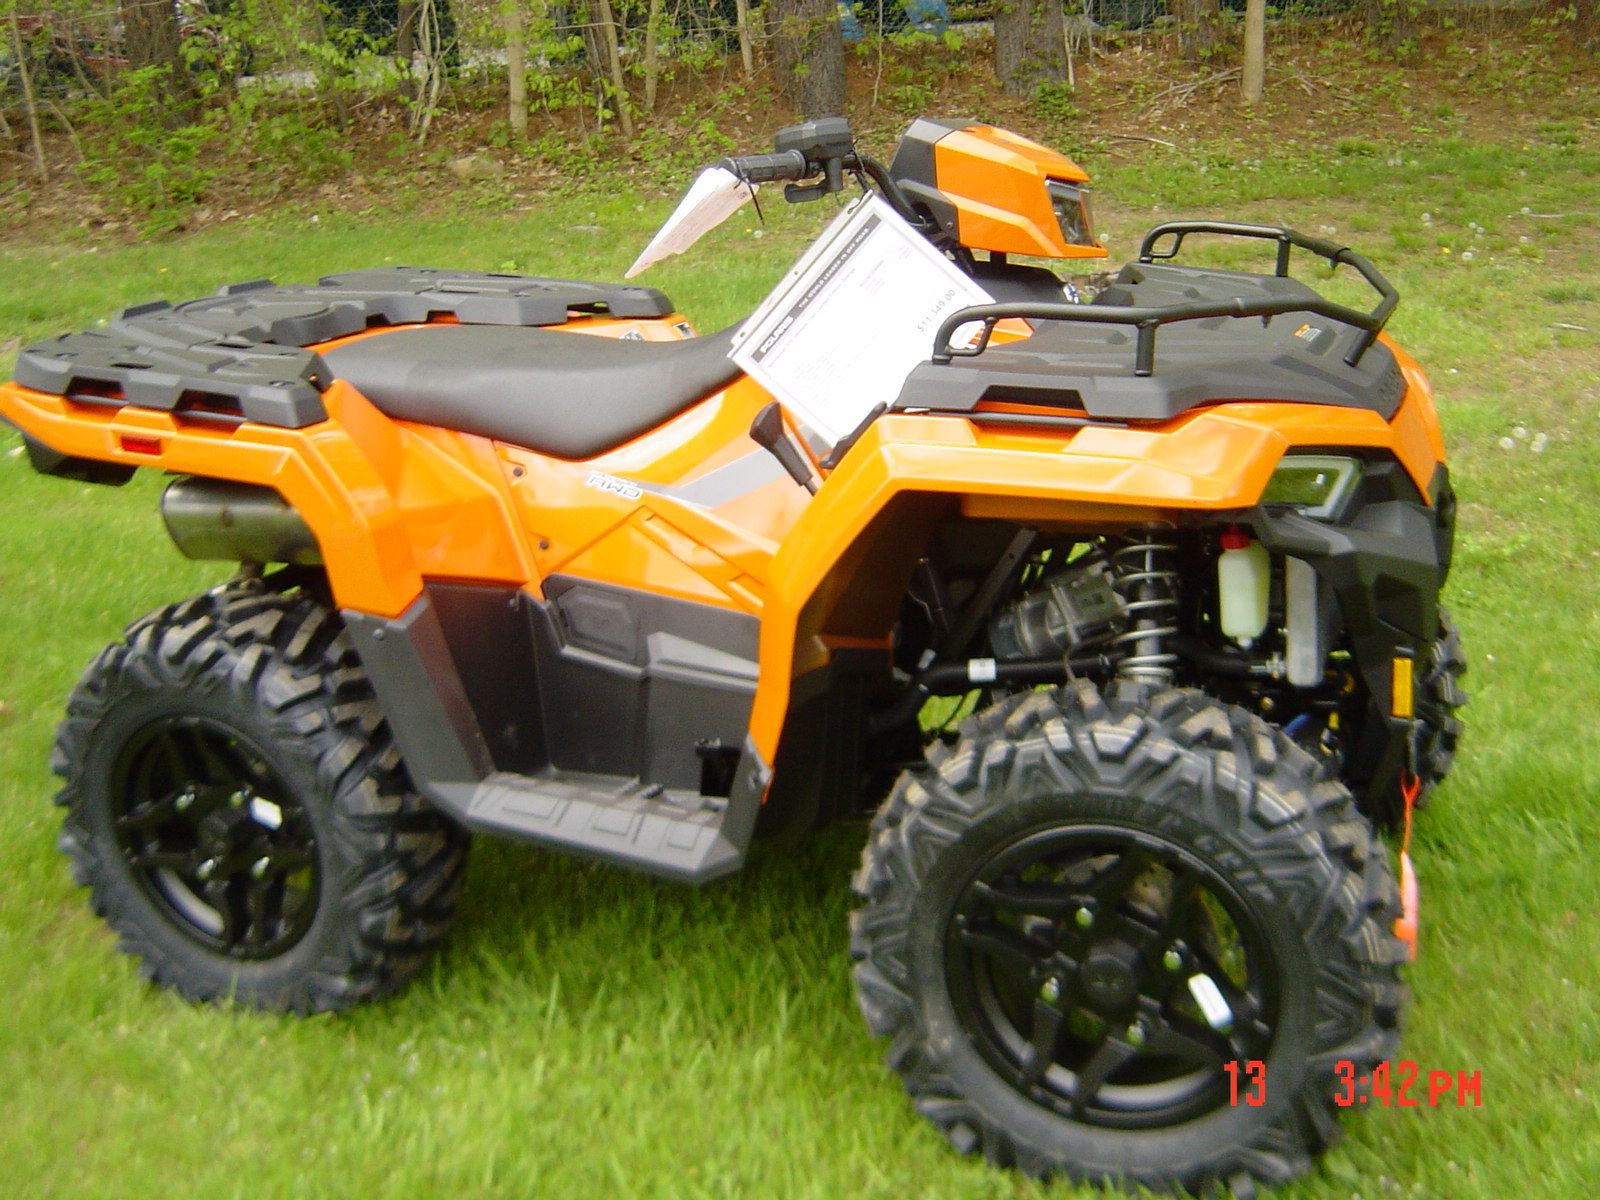 2022 Polaris Sportsman 570 Ultimate Trail Limited Edition in Brewster, New York - Photo 4